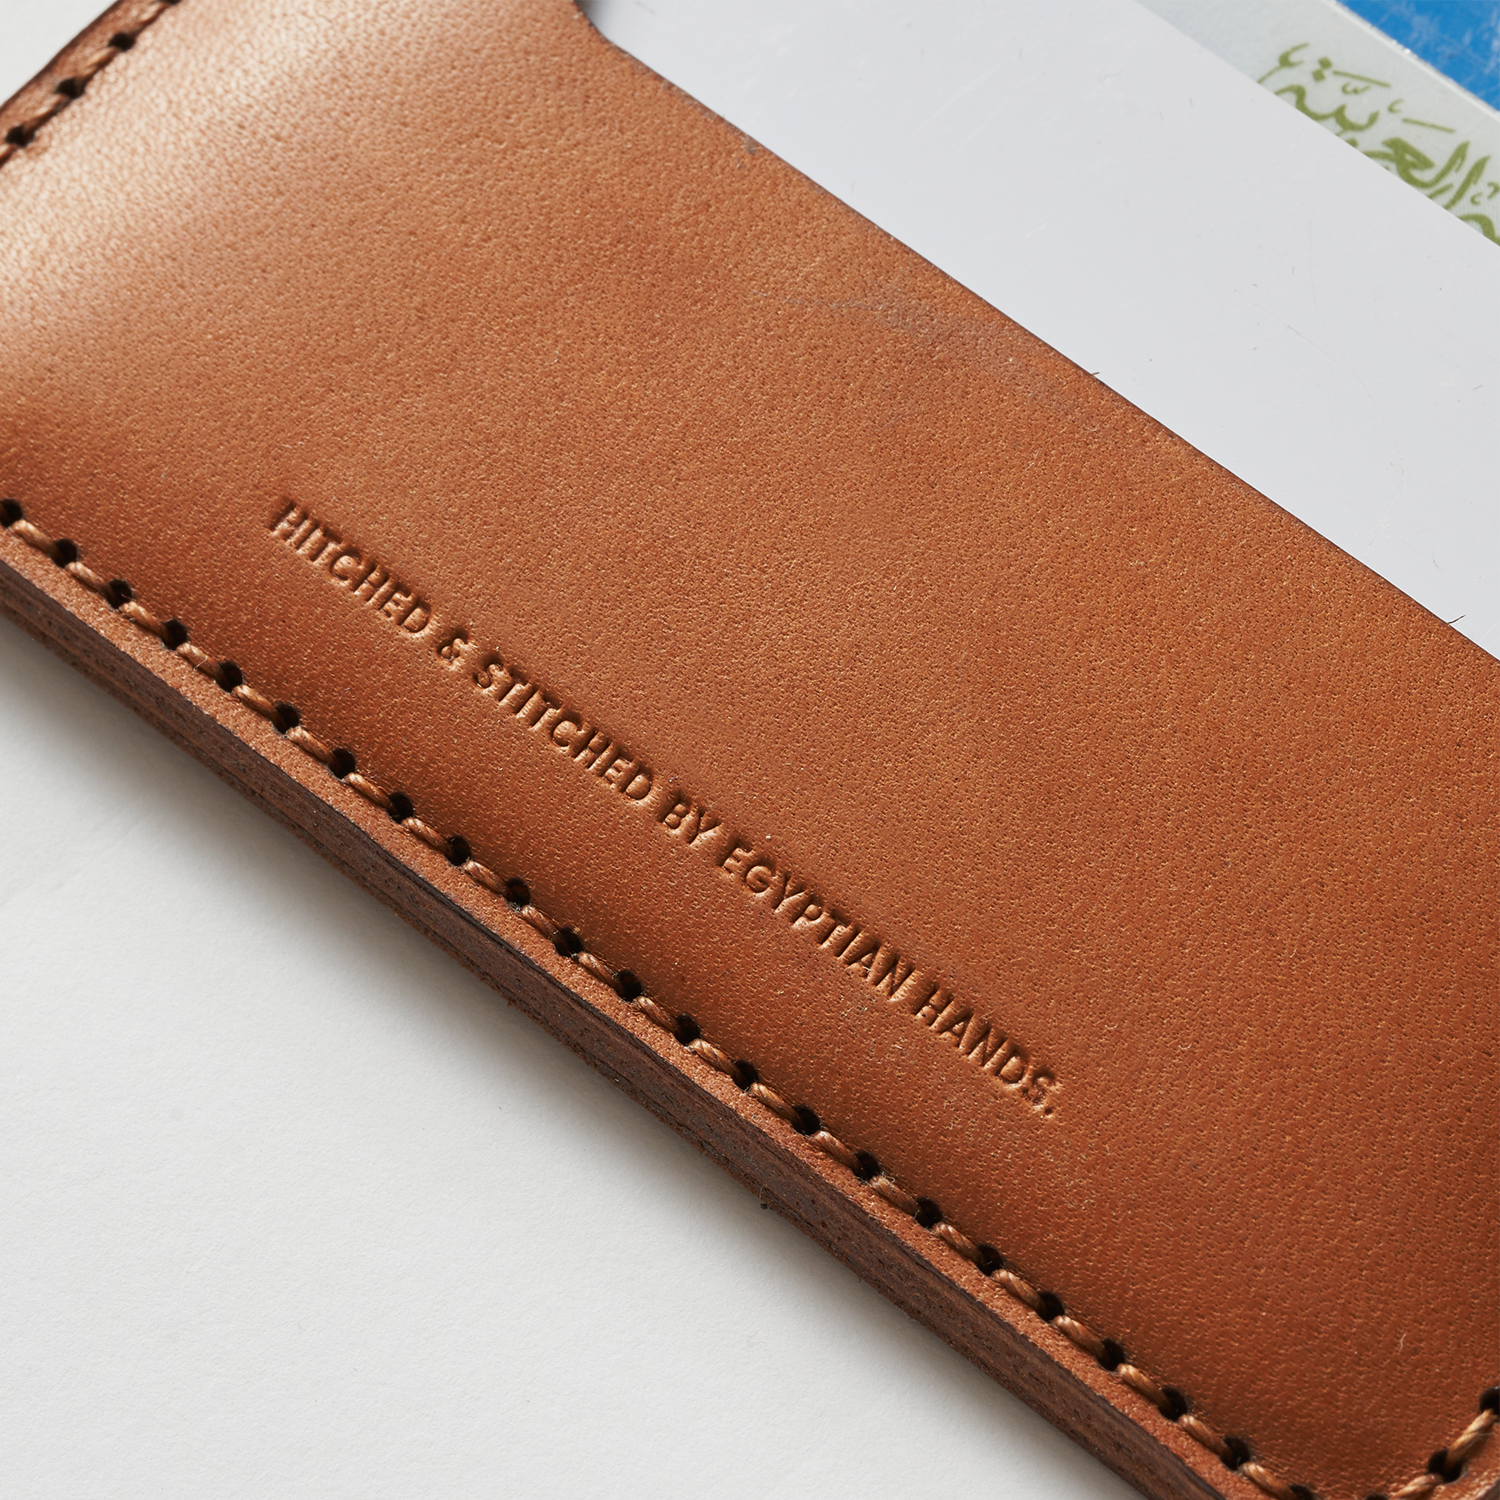 Close-up of a brown leather bifold wallet with embossed text and stitching, against a white background.